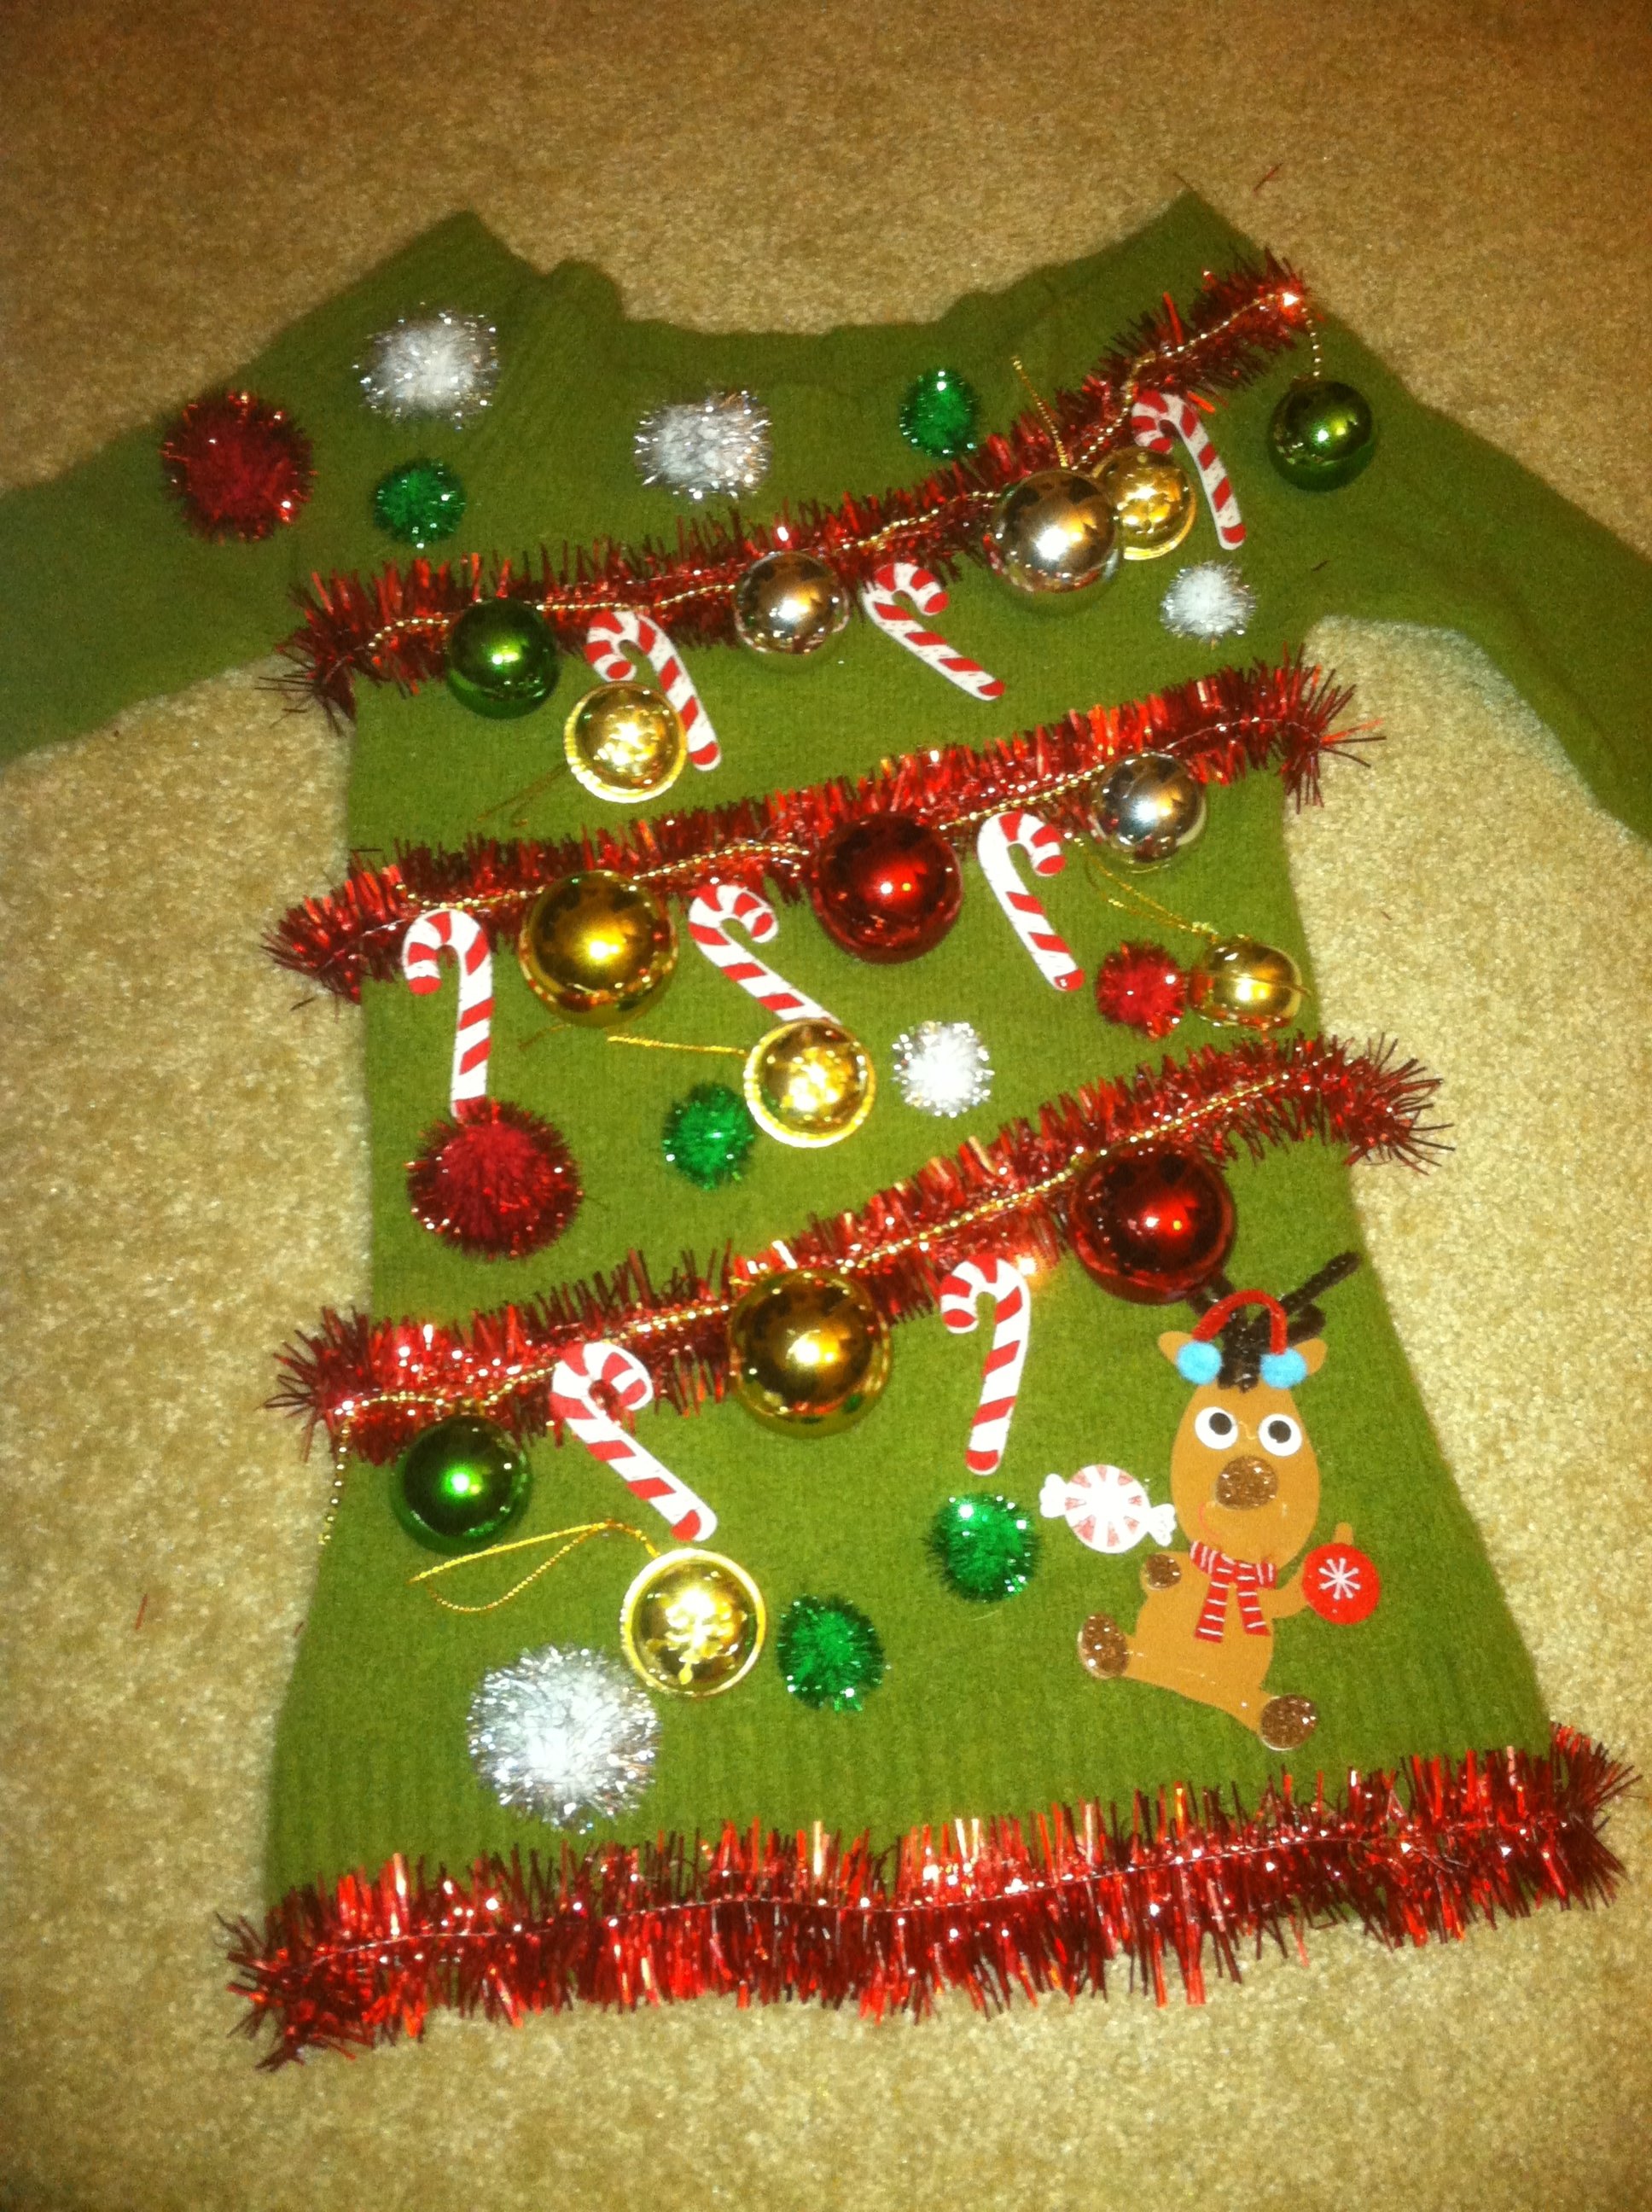 10 Ideal Diy Ugly Christmas Sweater Ideas diy ugly christmas sweaters that prove youre awesome sweater ideas 4 2022